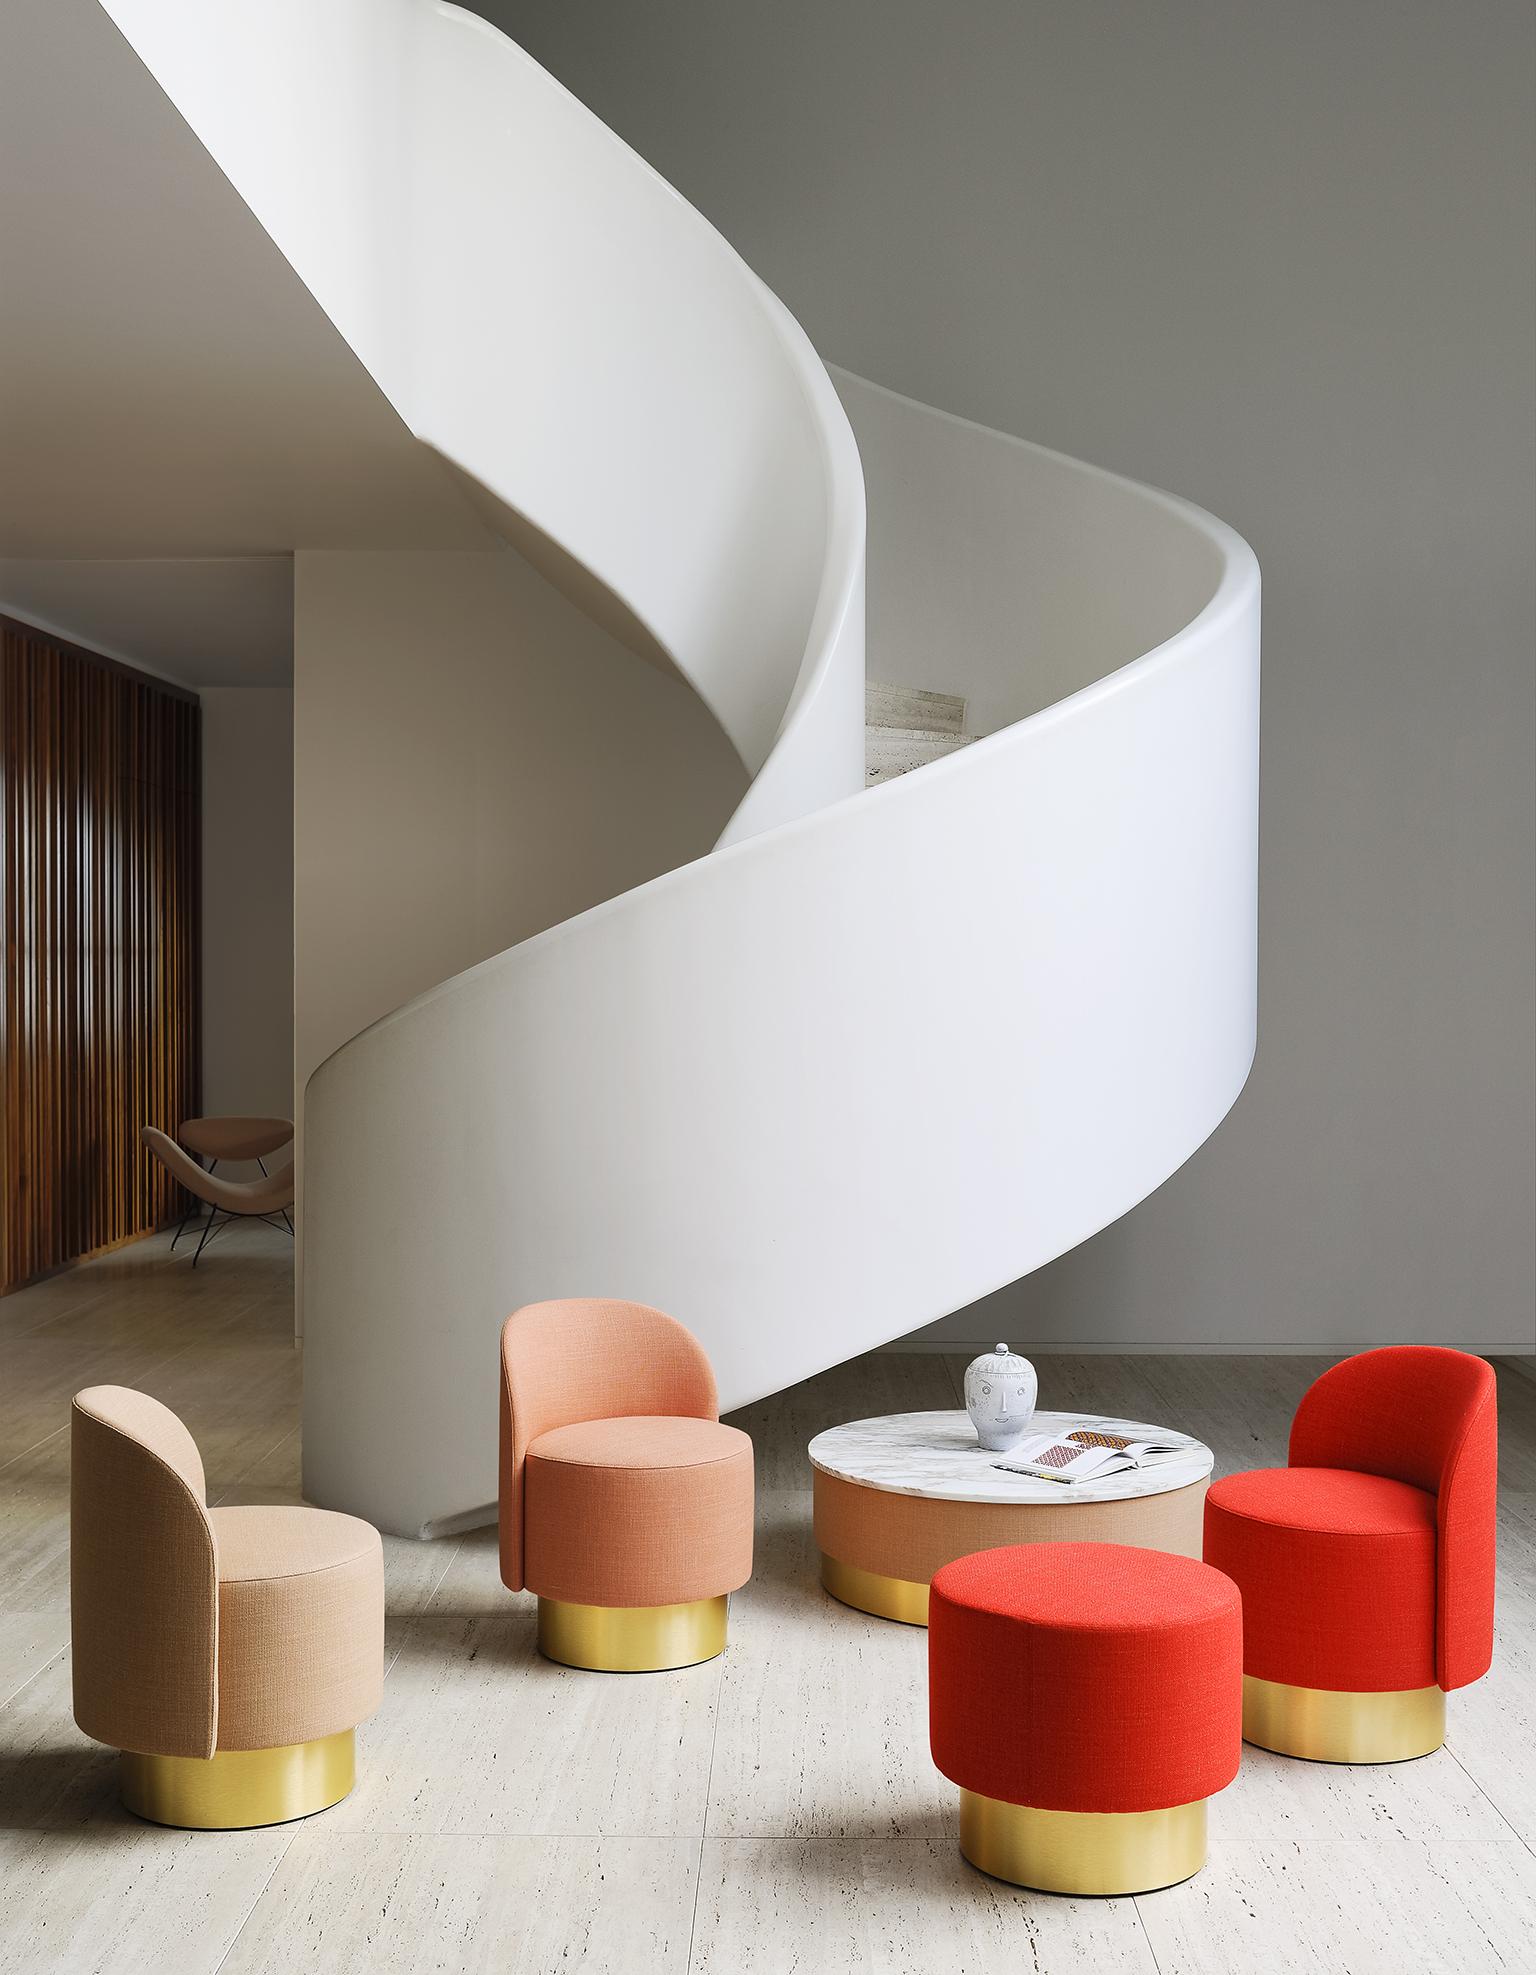 The new project with Studiopepe is a collaboration with designers Arianna Lelli Mami and Chiara Di Pinto, the creative minds behind the consultancy. Pastilles is a collection of small armchairs, ottomans and coffee tables, with soft and enveloping